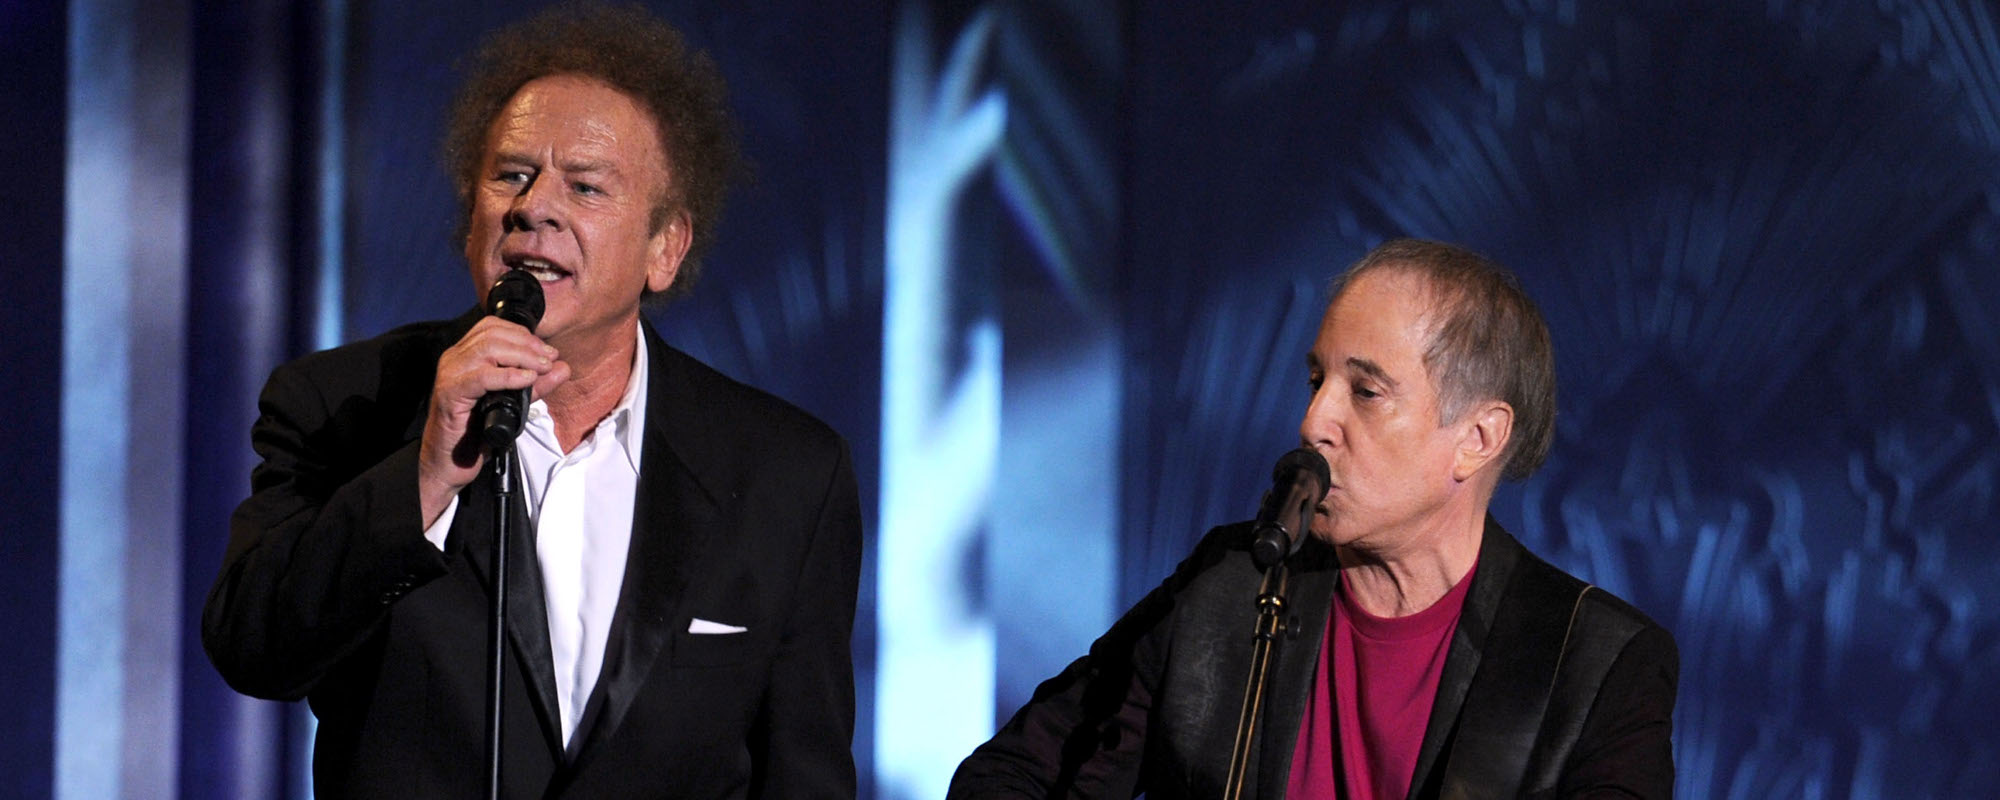 The Story and Meaning Behind “The Dangling Conversation” by Simon & Garfunkel